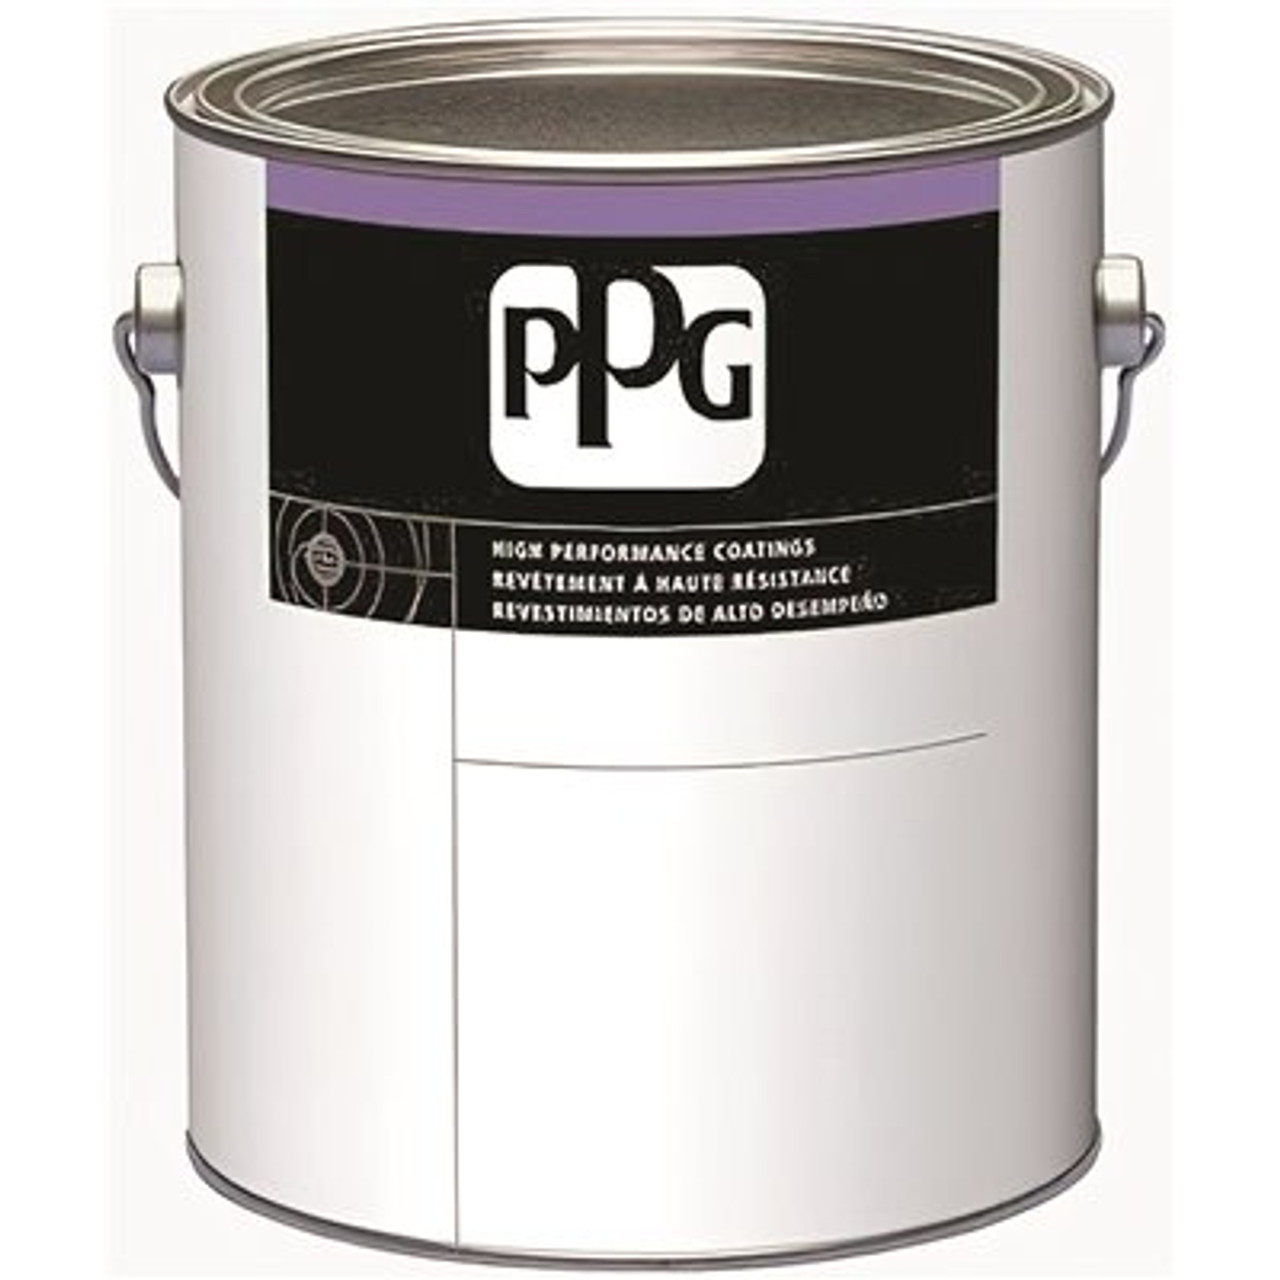 PPG Hpc Industrial Alkyd Gloss 4308 White - DTM Paint, 1 Gallon